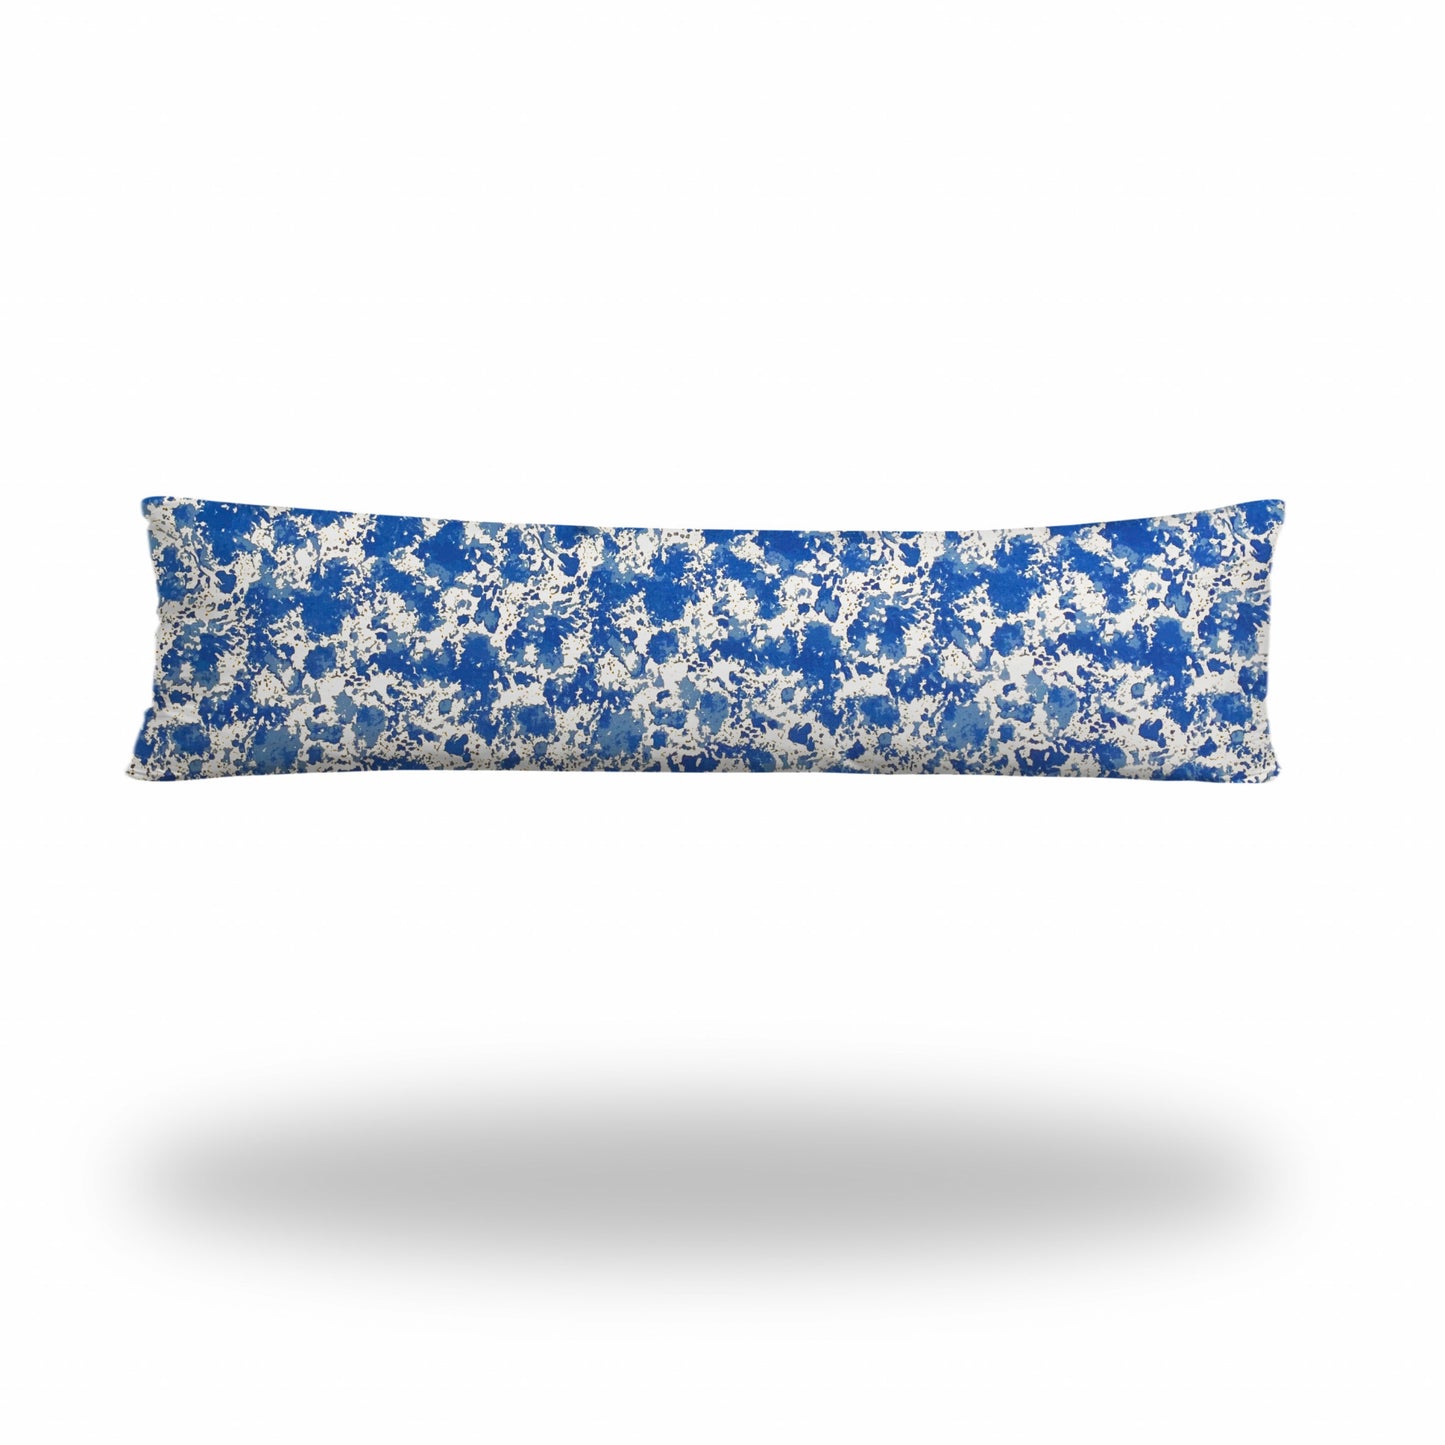 12" X 48" Blue And White Enveloped Lumbar Indoor Outdoor Pillow Cover